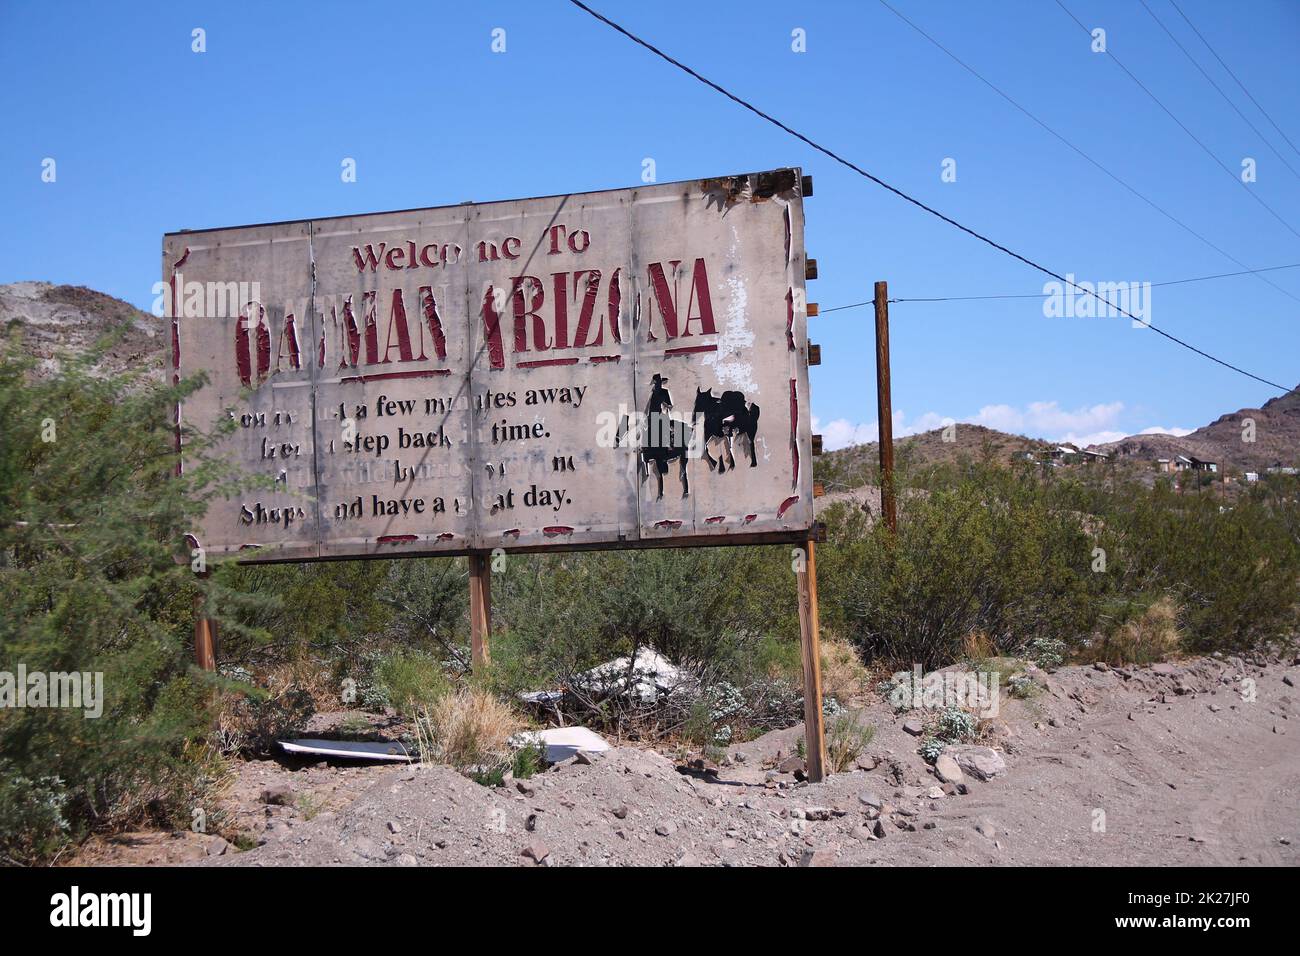 The old ruin of the abandoned village of Oatman in the West Coast Stock Photo